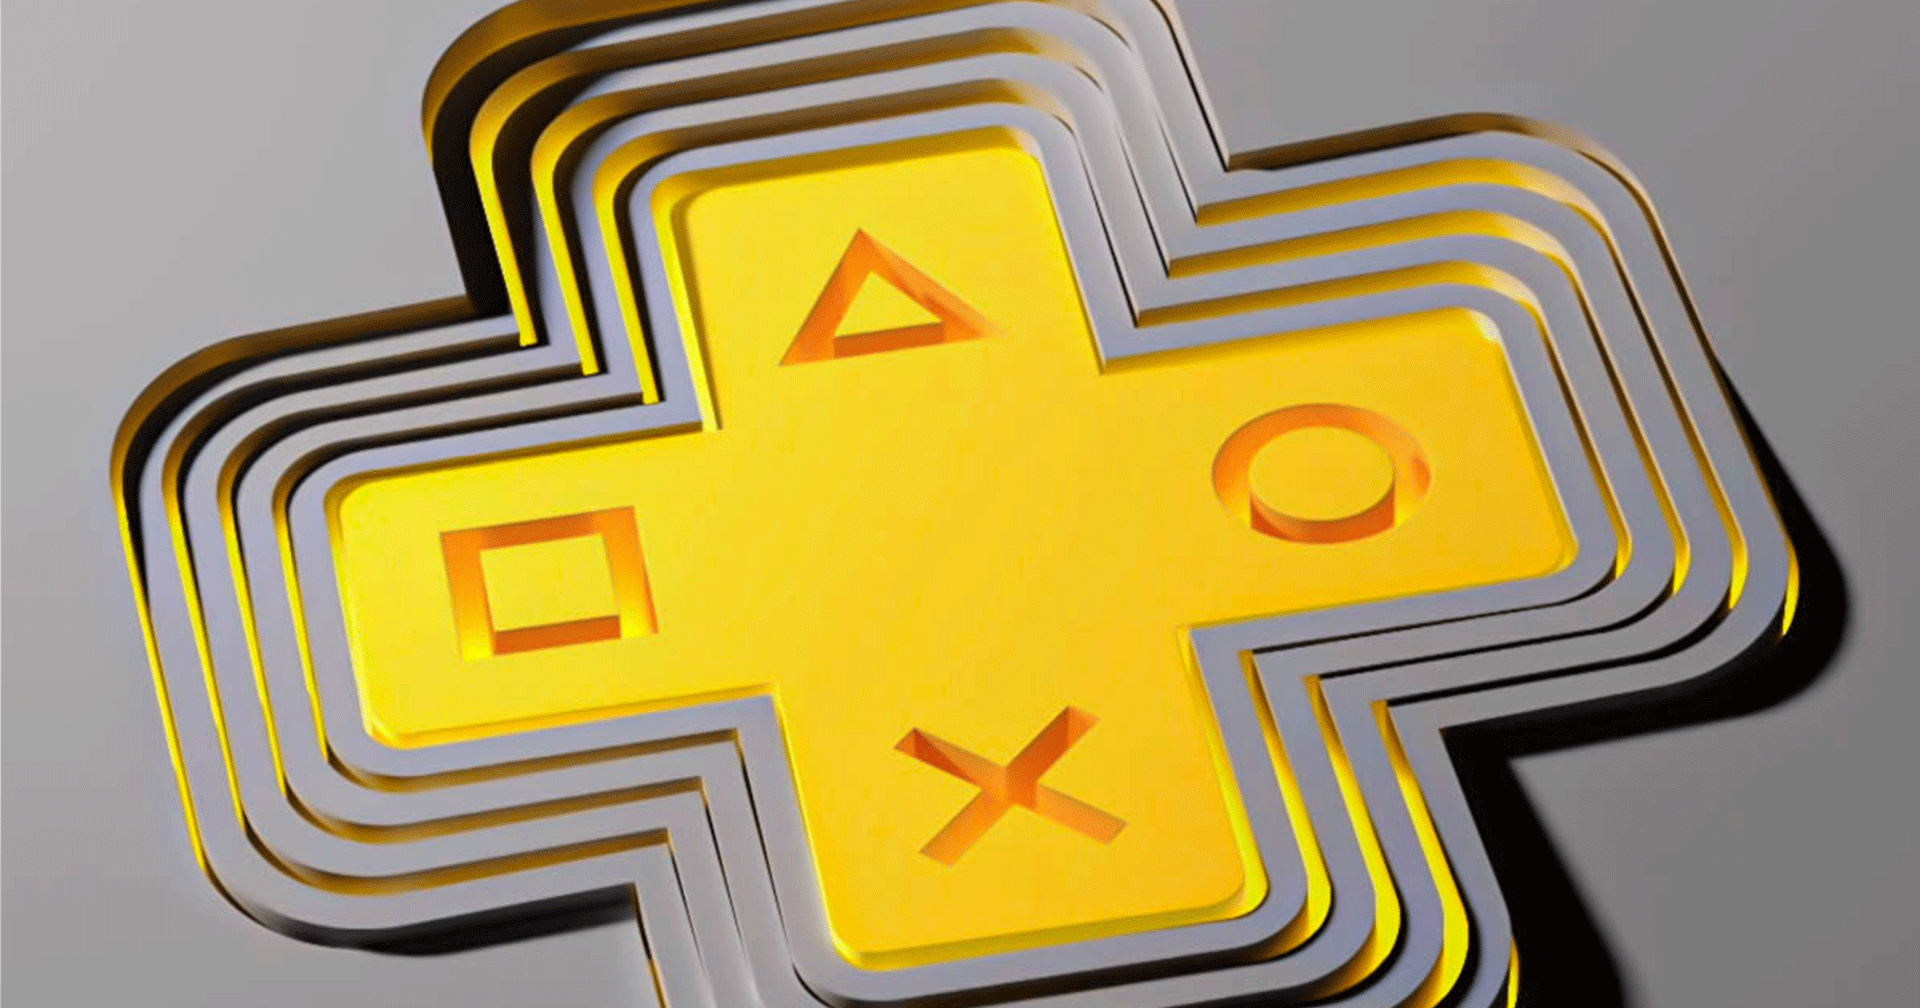 New PlayStation Plus